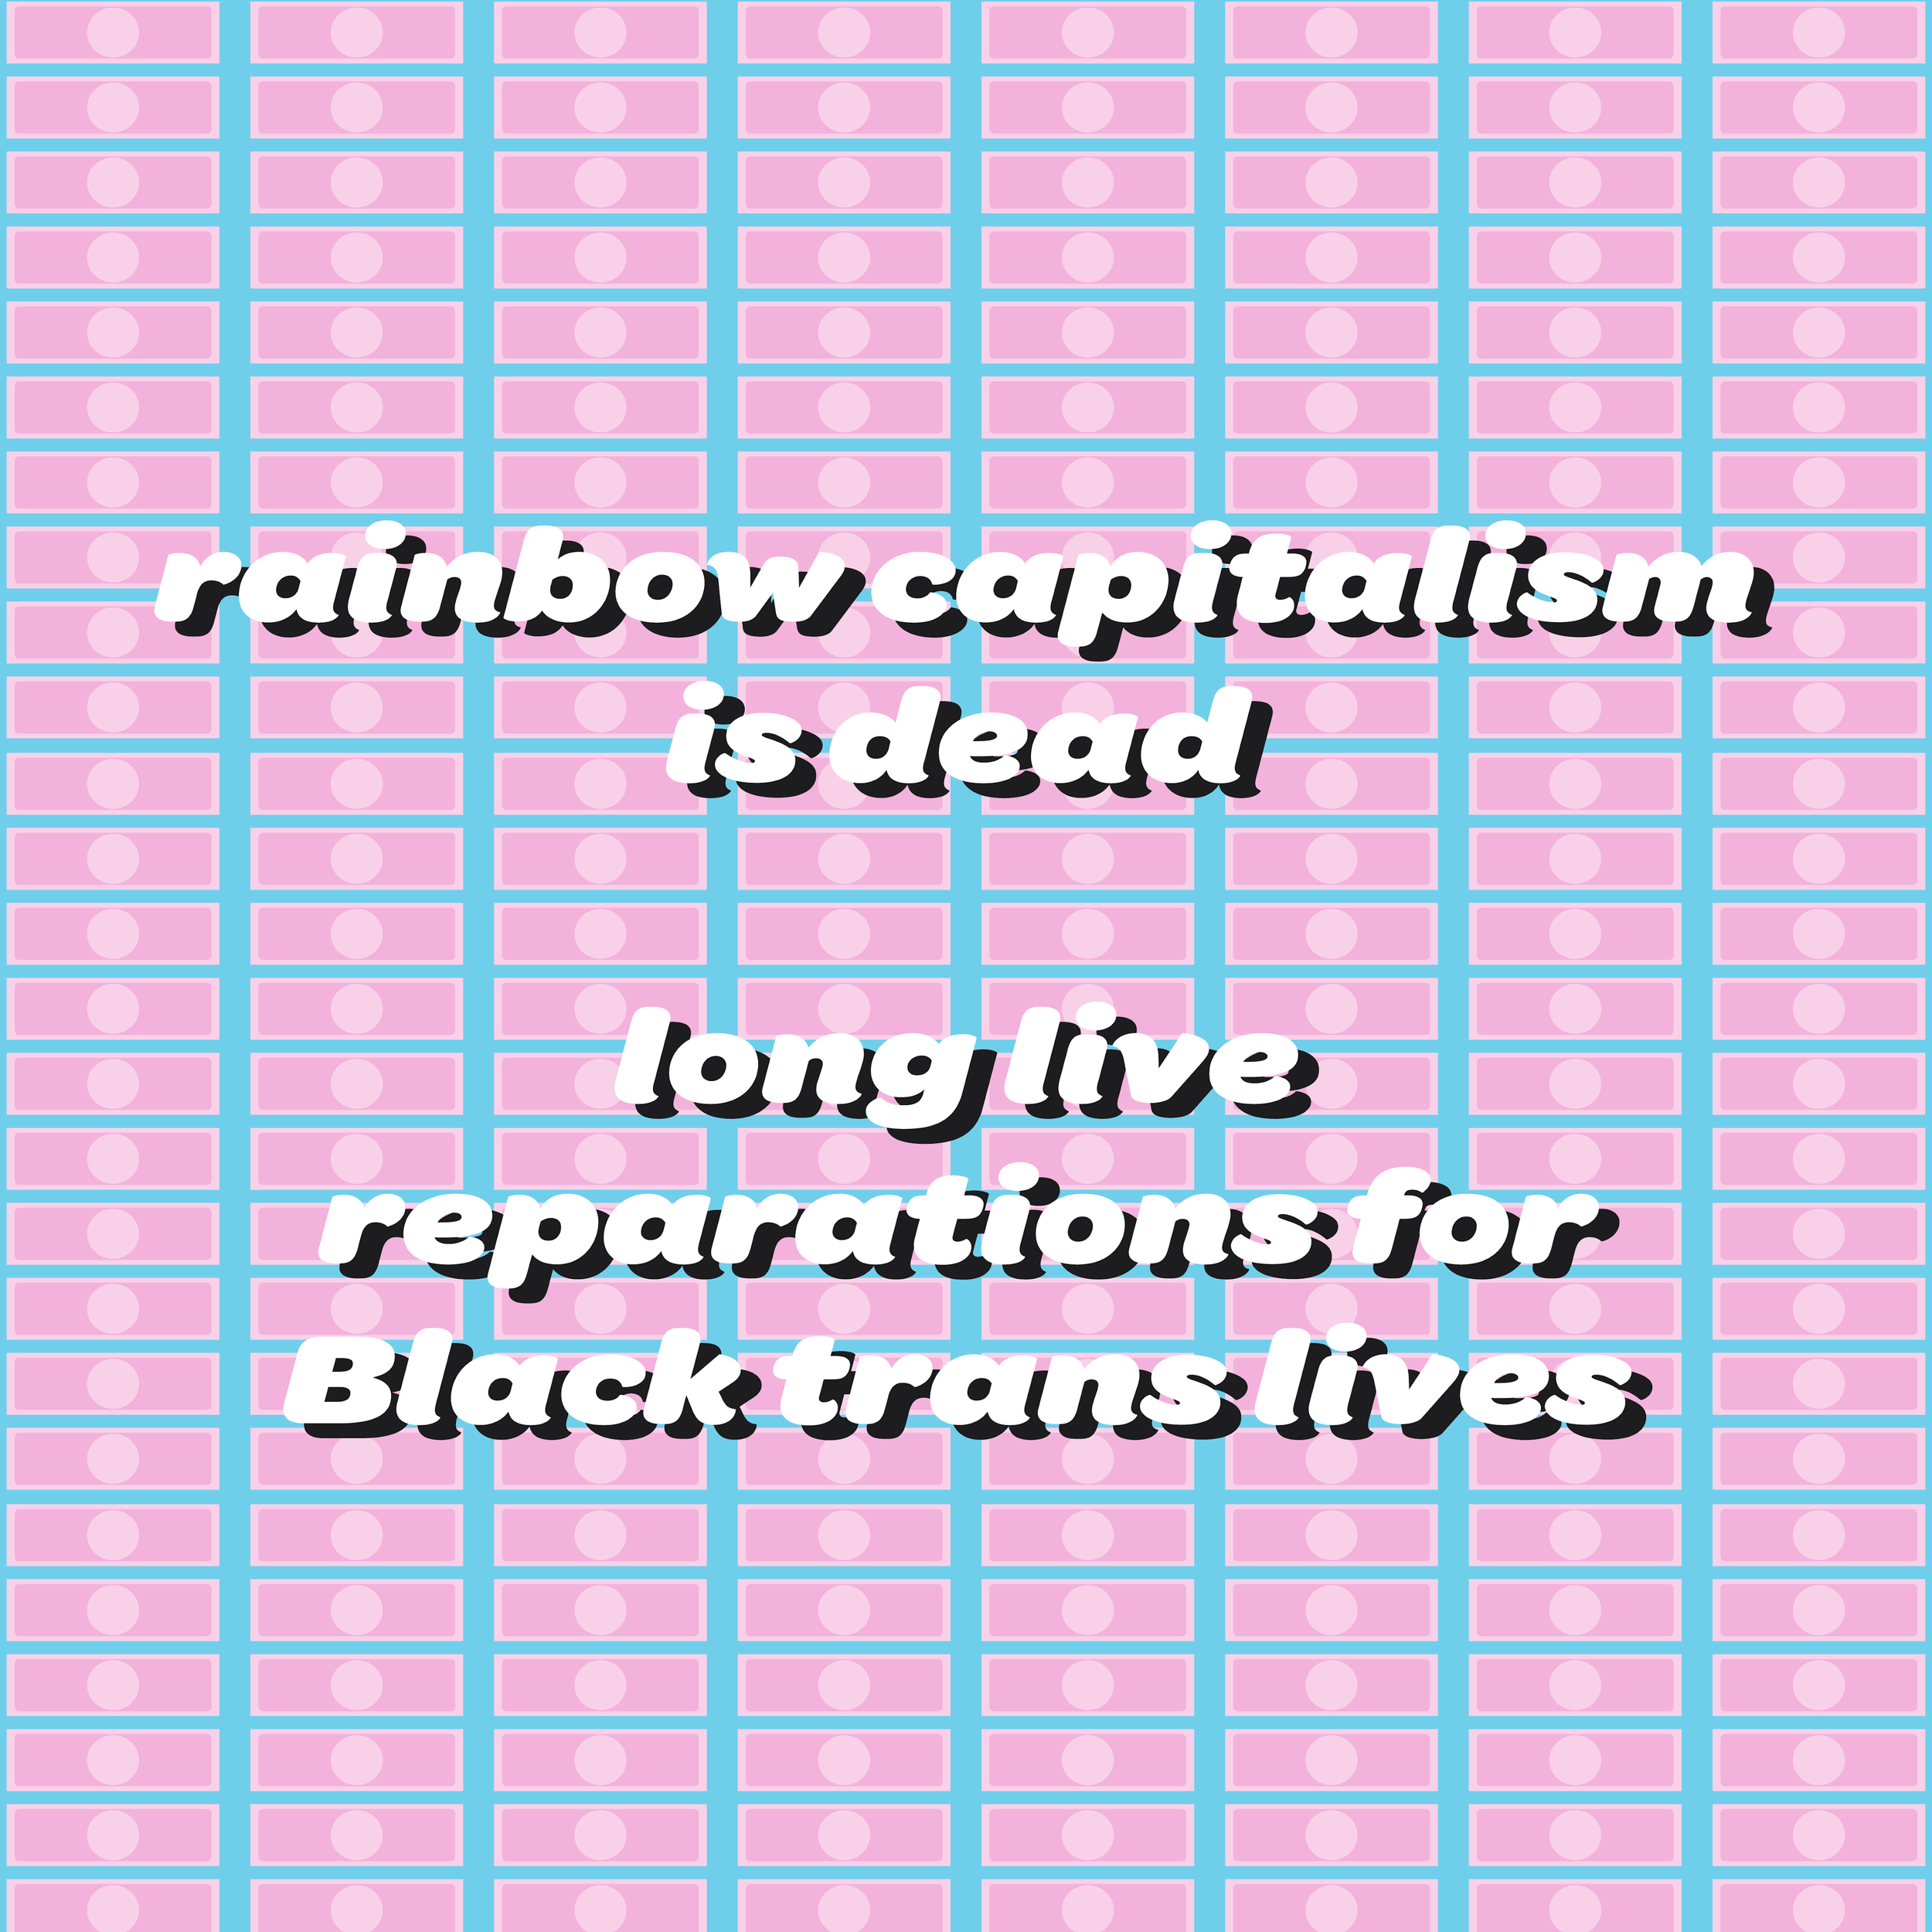 white text with a black drop shadow reads "rainbow capitalism is dead / long live reparations for Black trans lives". It is on a background of a blue void filled with rows of pink dollar bills.